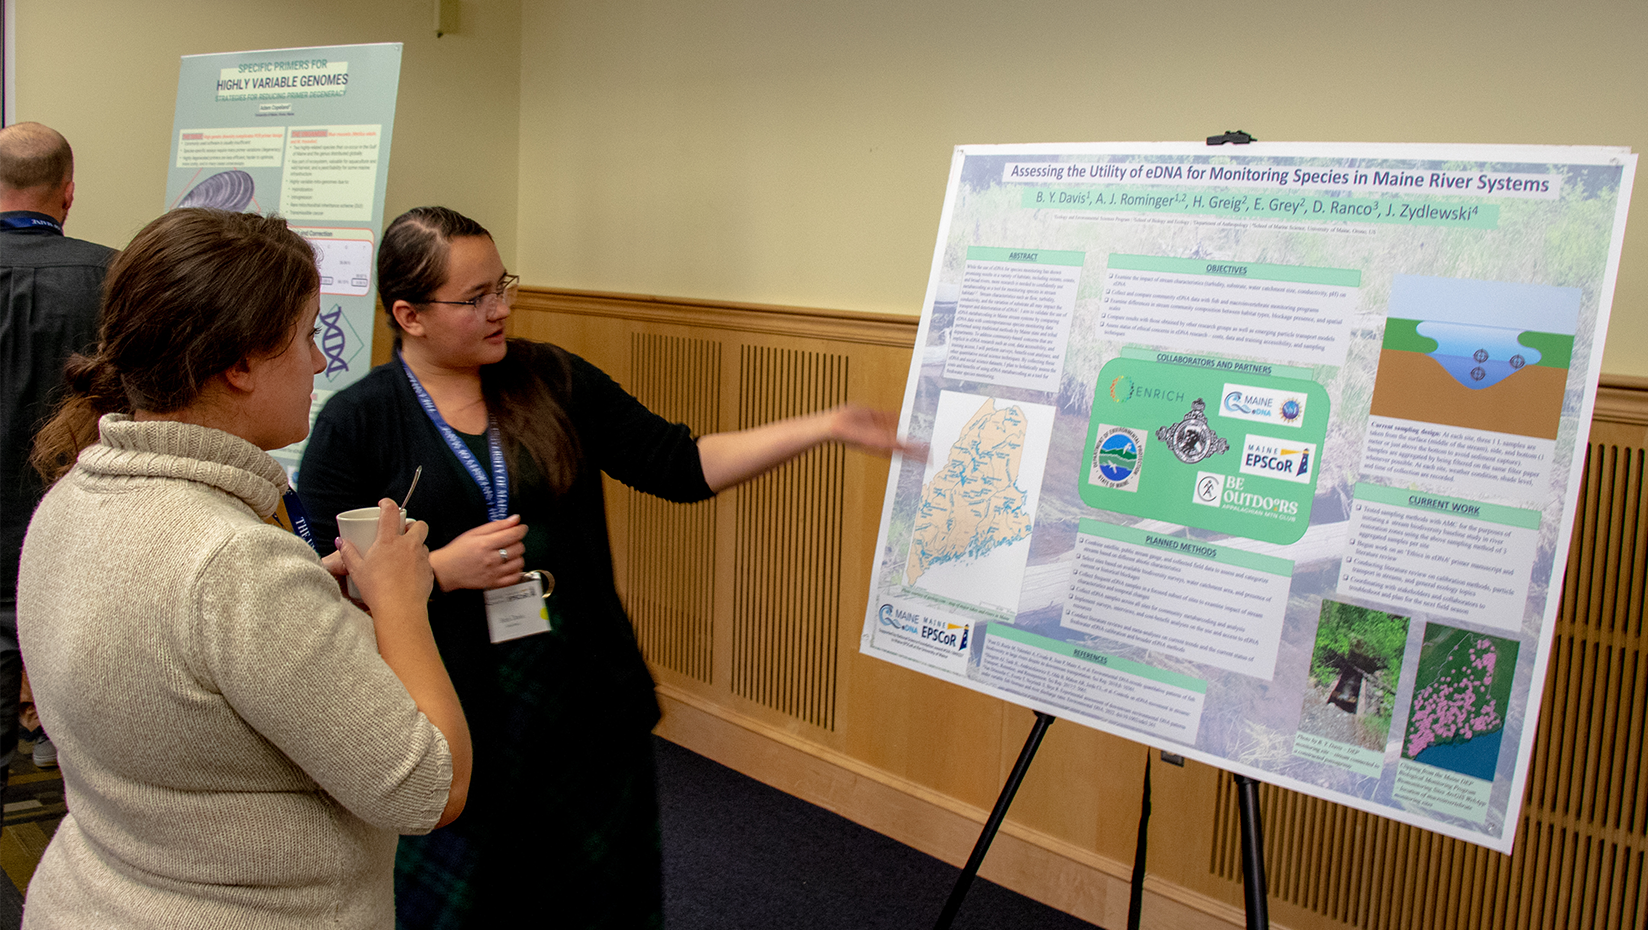 A photo of Beth Davis presenting a poster.